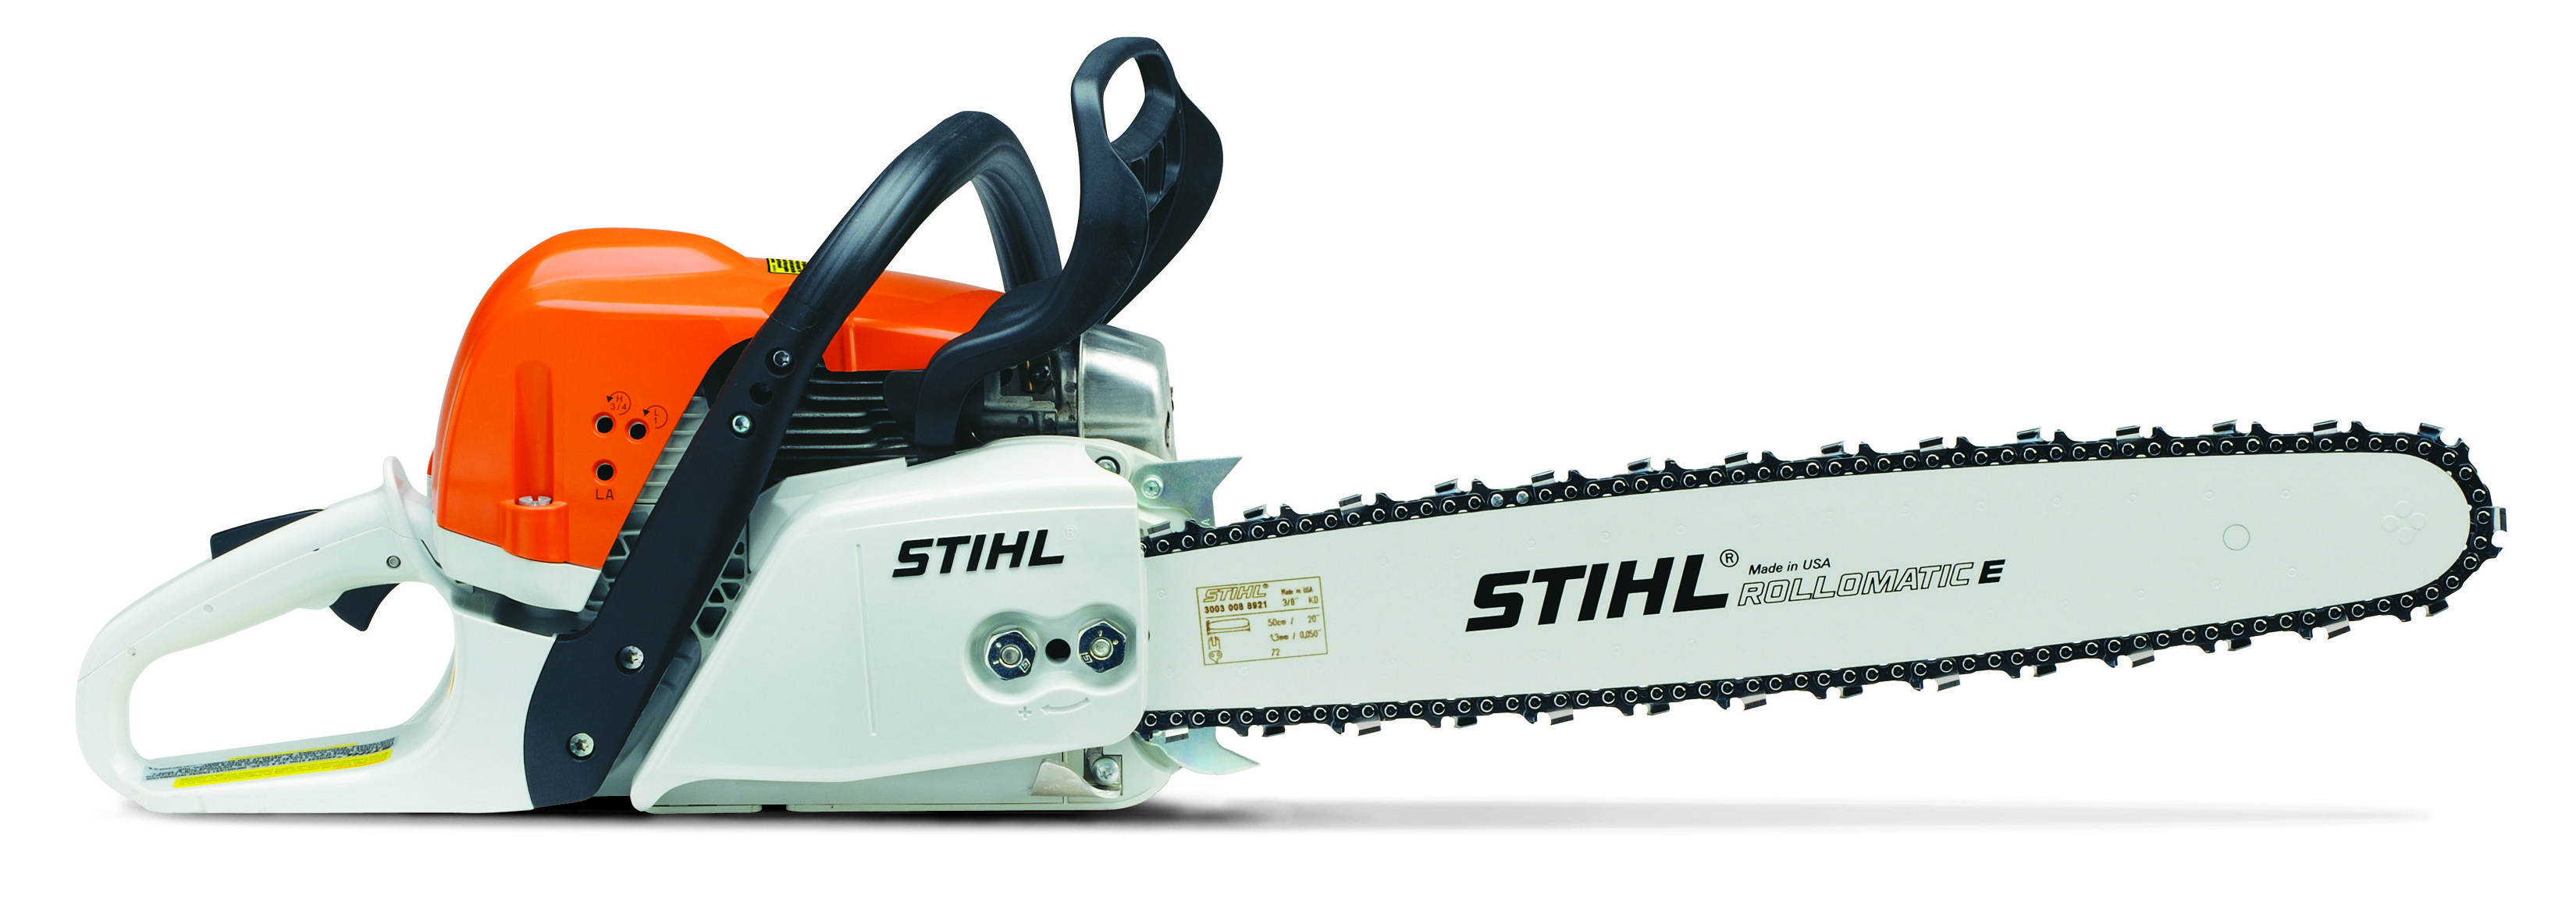 20" Full Chisel Saw Chain for STIHL MS391 Chainsaws